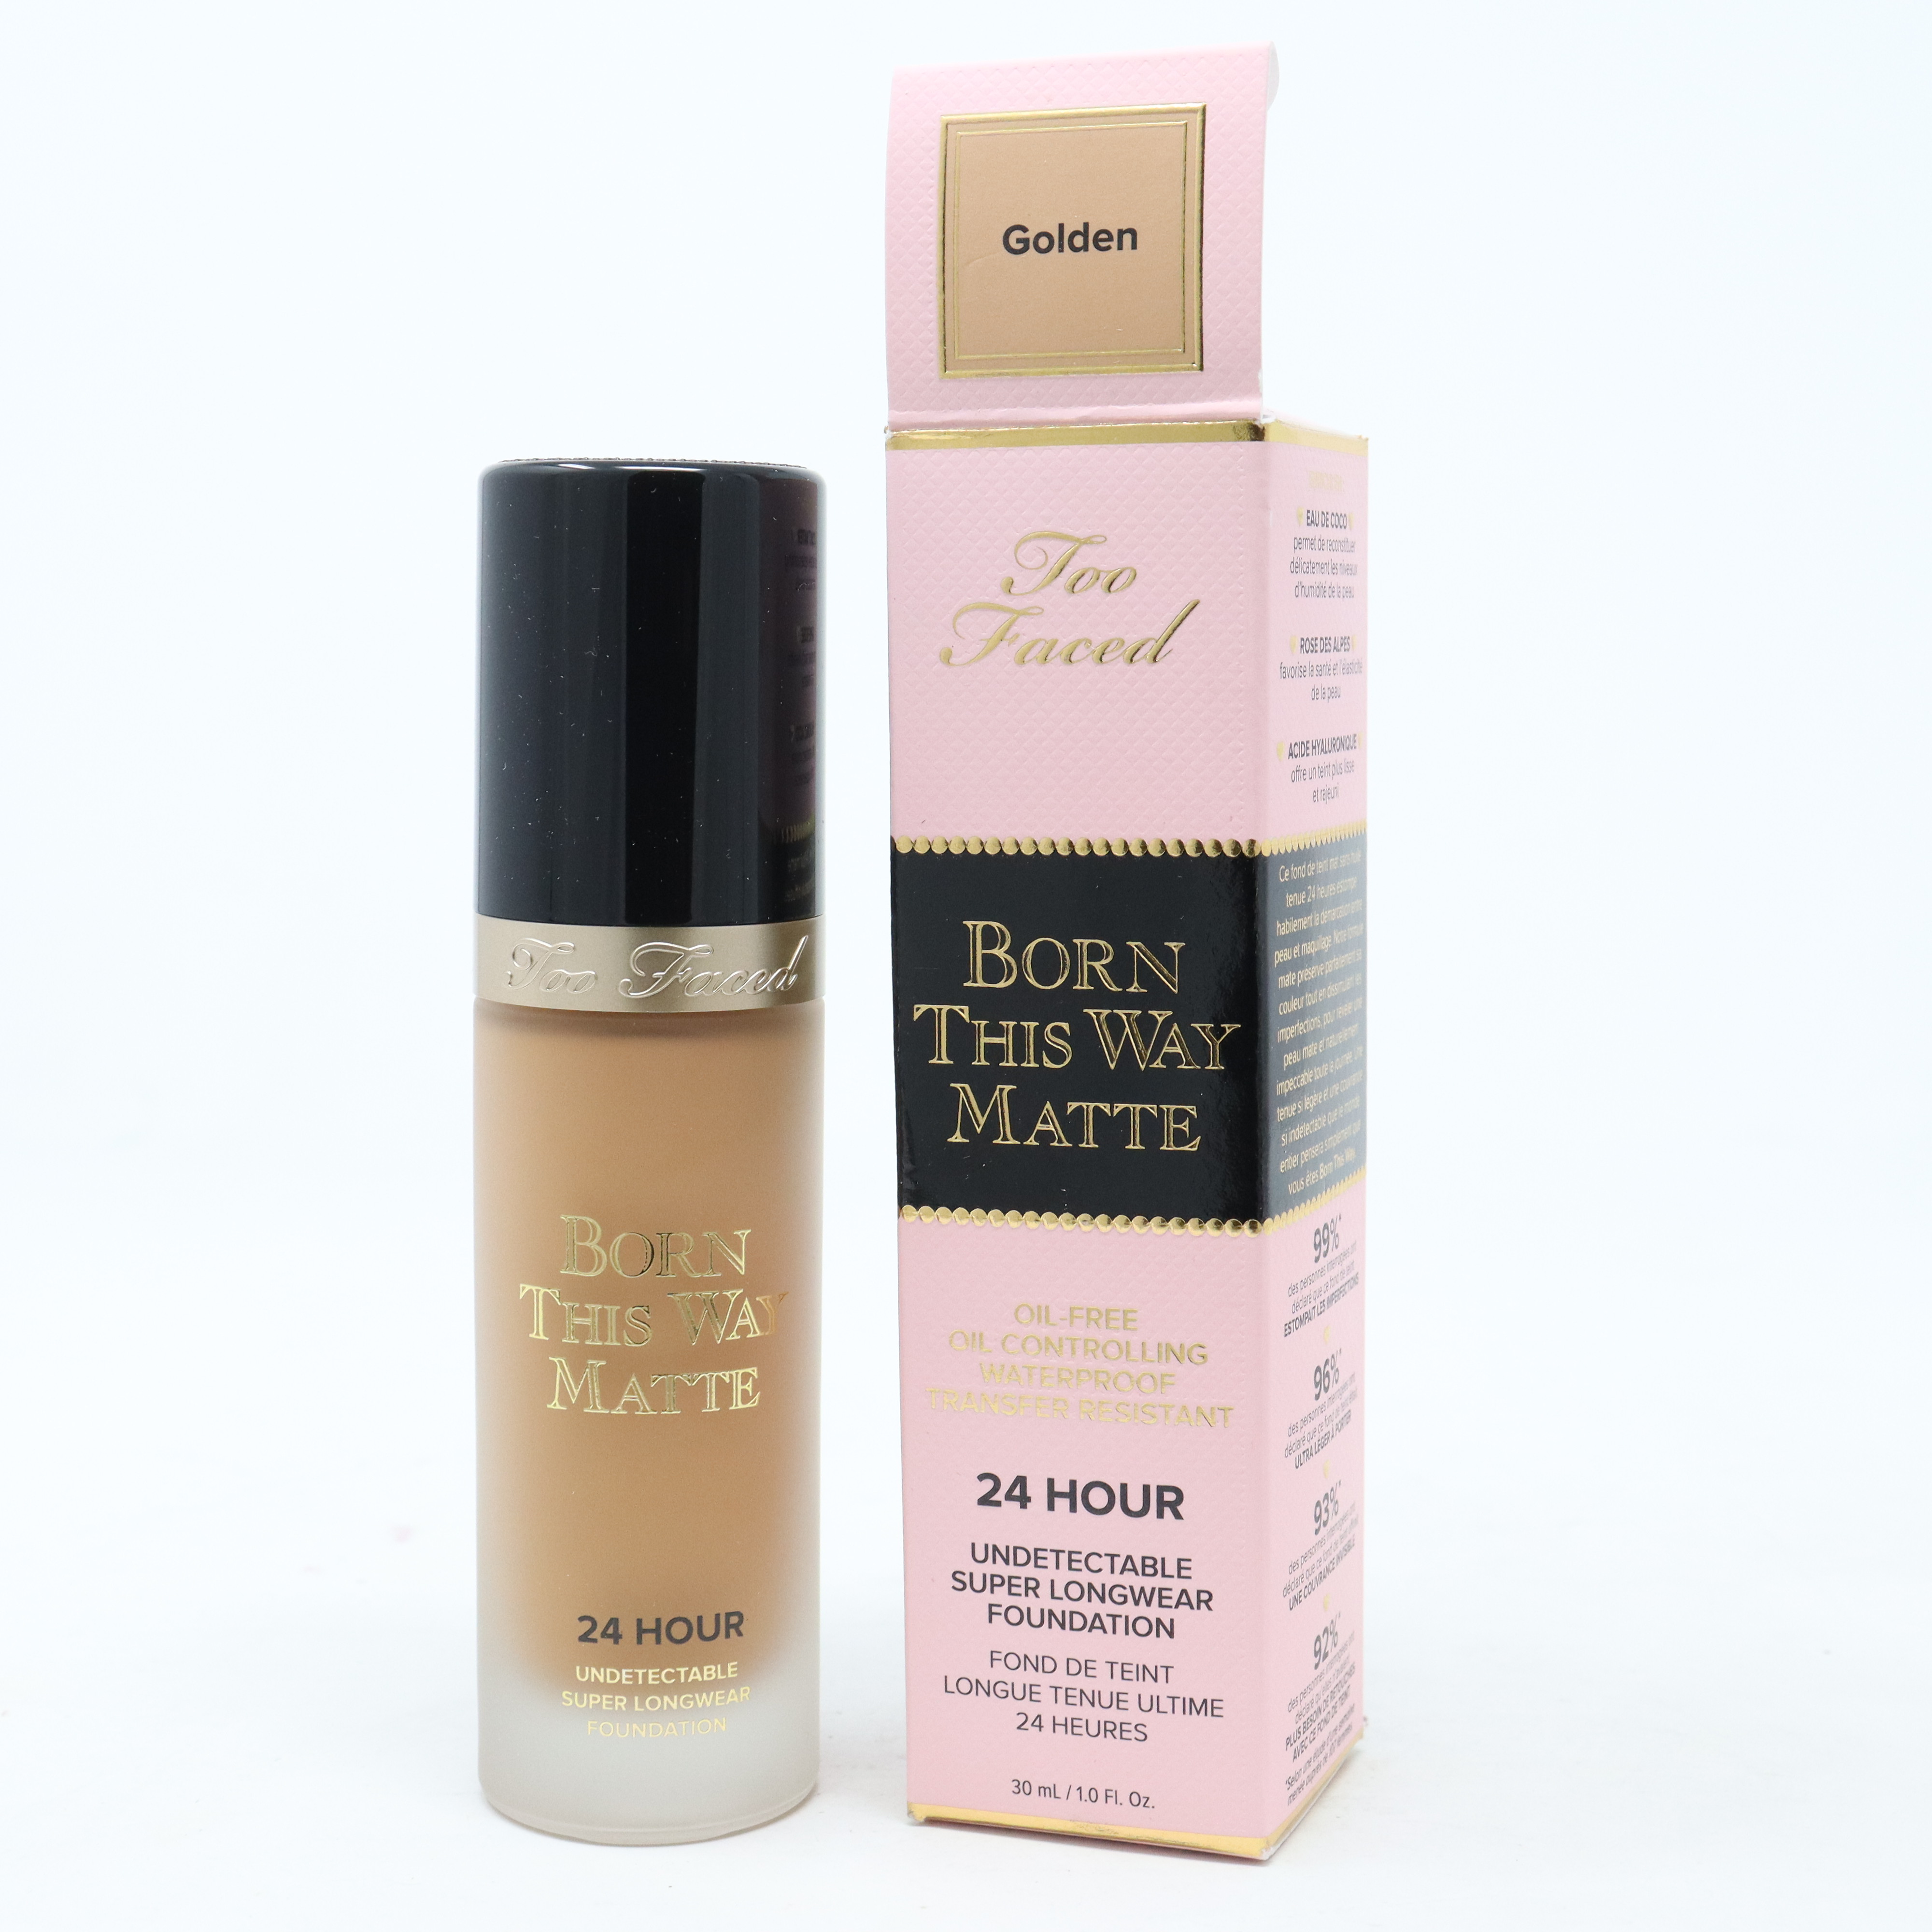 Too Faced Born This Way eBay With New Foundation Box 24 | 1.0oz/30ml Hour Matte